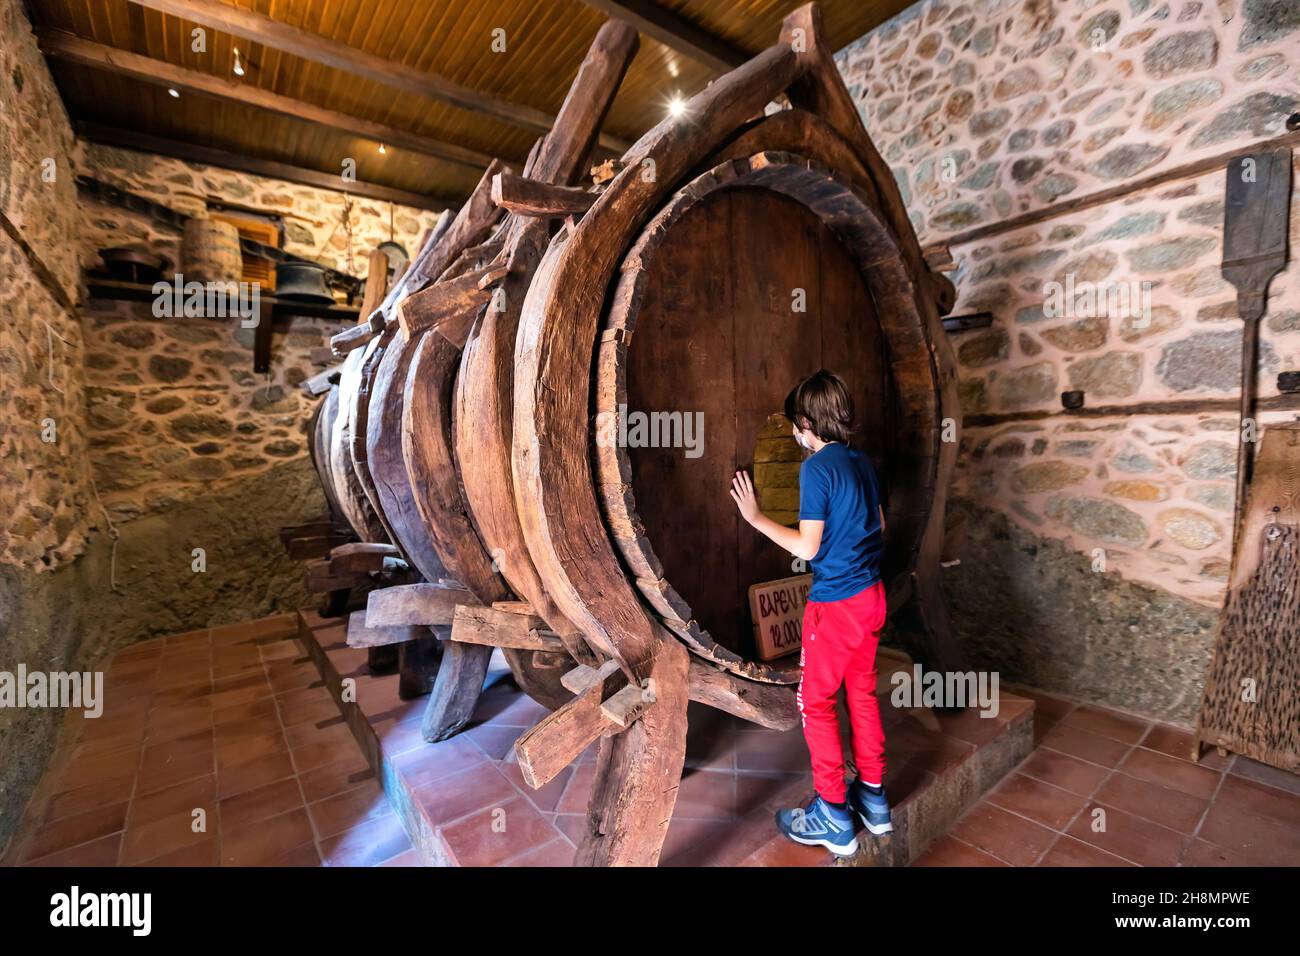 A huge wooden barrel (with a capacity of 12 tons) in Varlaam monastery, Meteora, Trikala prefecture, Thessaly, Greece. Stock Photo